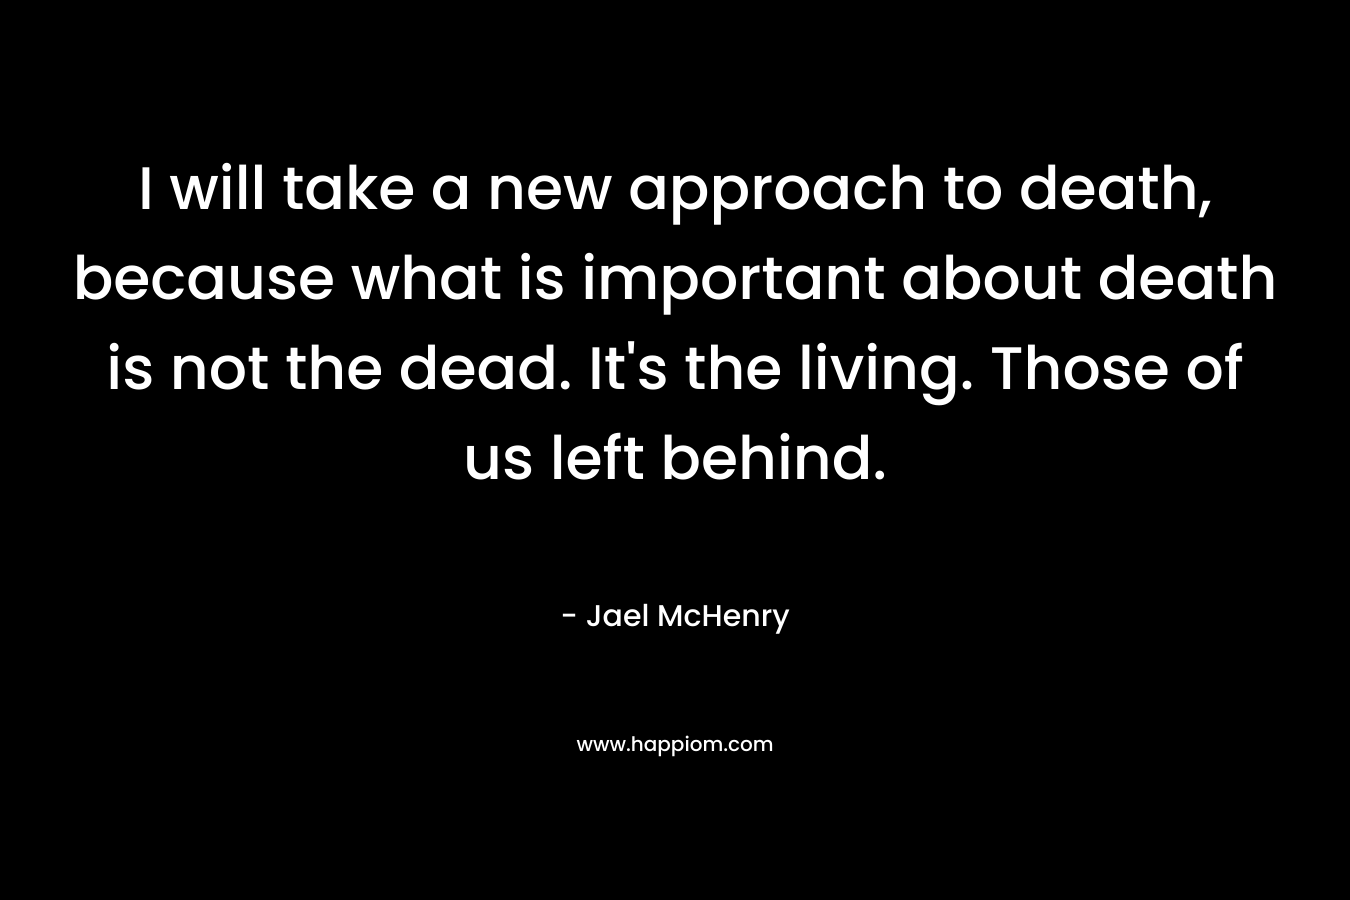 I will take a new approach to death, because what is important about death is not the dead. It’s the living. Those of us left behind. – Jael McHenry